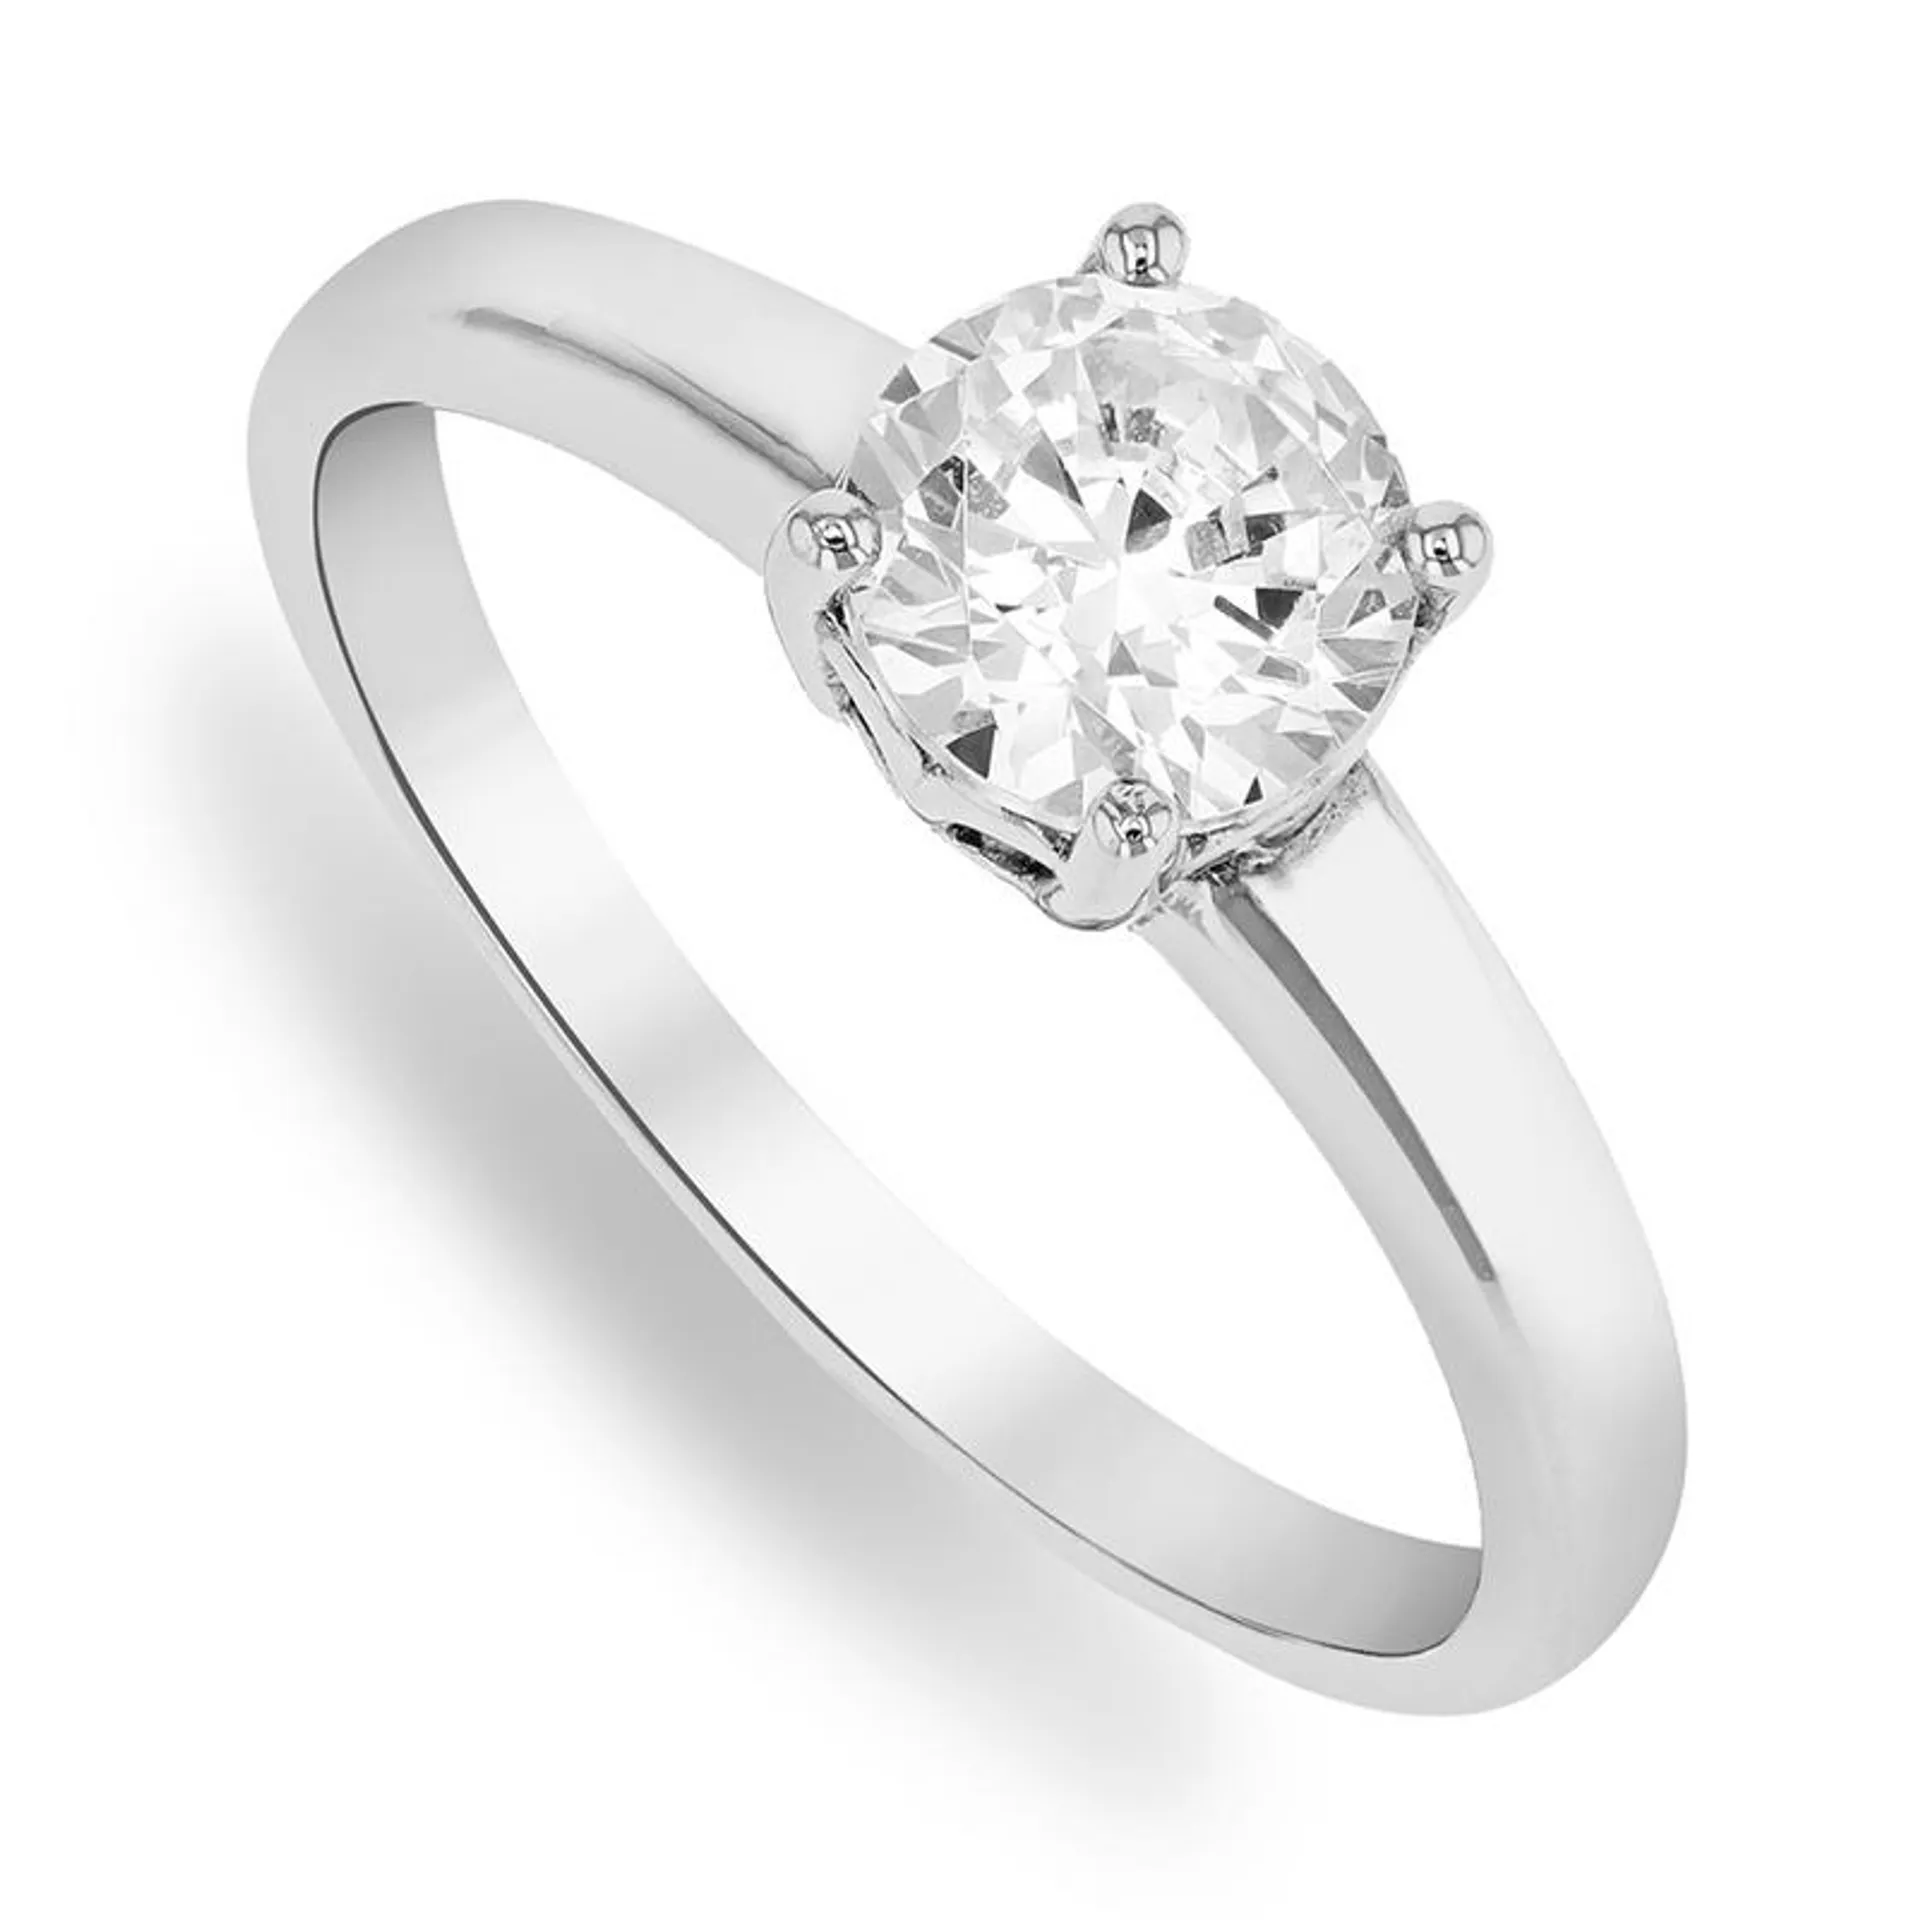 Sterling Silver Cubic Zirconia Women's Classic Solitaire Ring